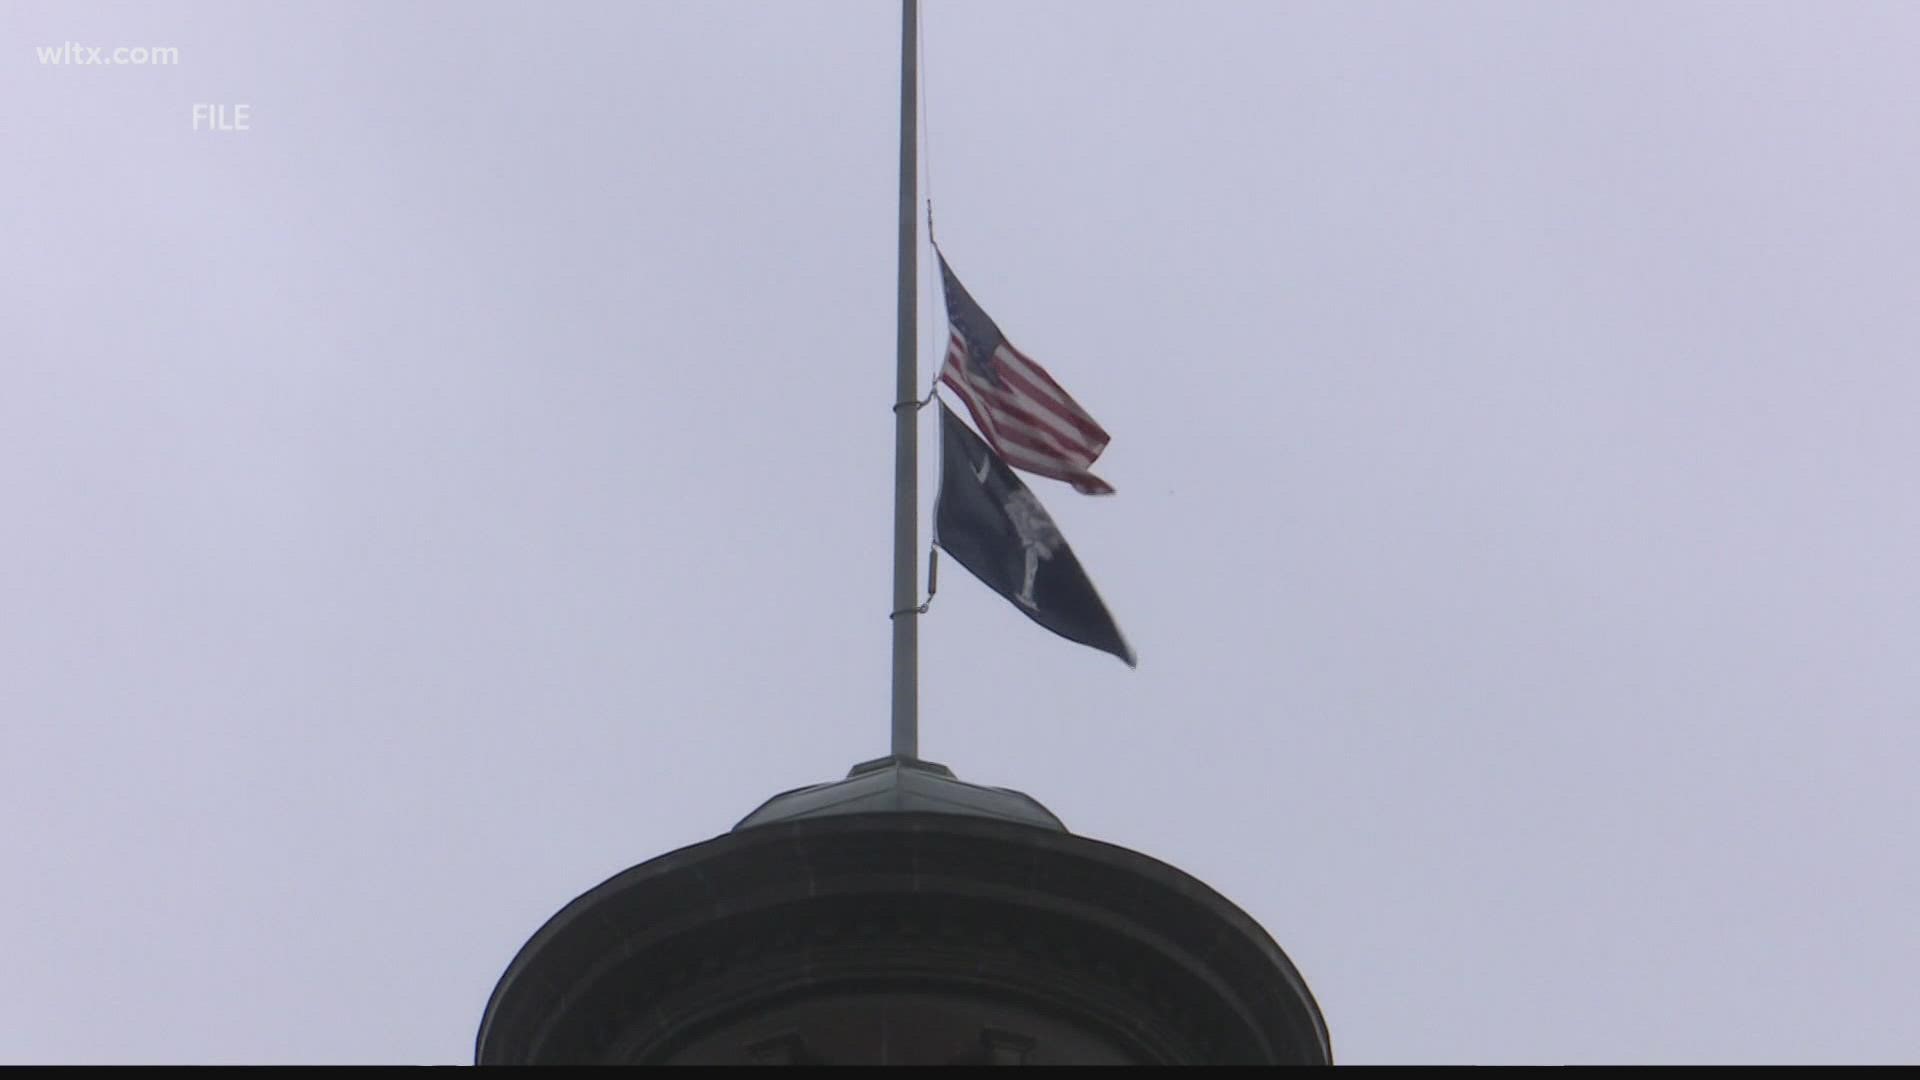 Governor McMaster is ordering flags on state buildings to be flown at half staff today in observance of National Pearl Harbor Remembrance Day.